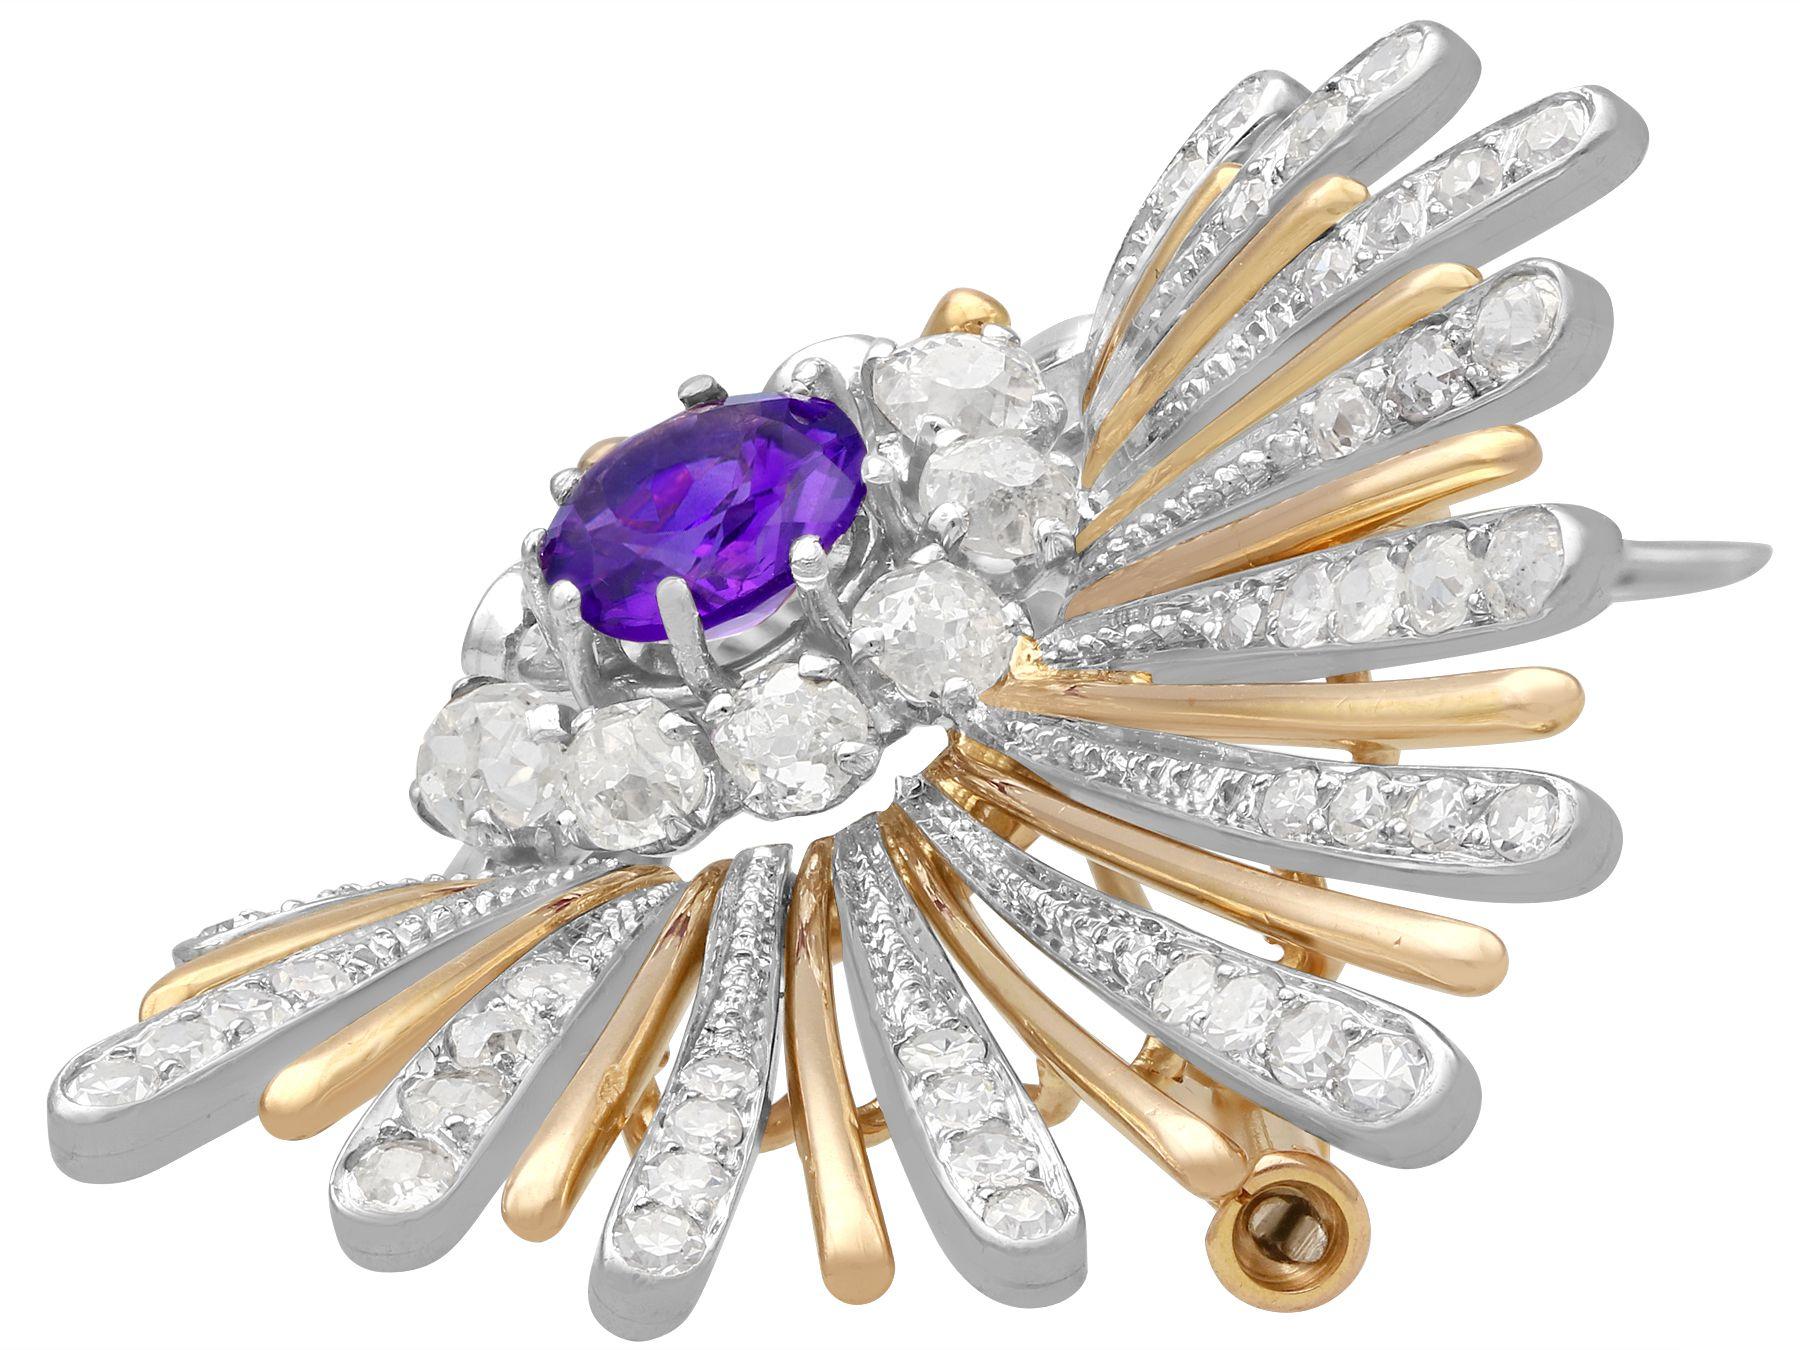 Art Deco 1.01 Carat Amethyst 1.69 Carat Diamond Platinum Yellow Gold Brooch In Excellent Condition For Sale In Jesmond, Newcastle Upon Tyne